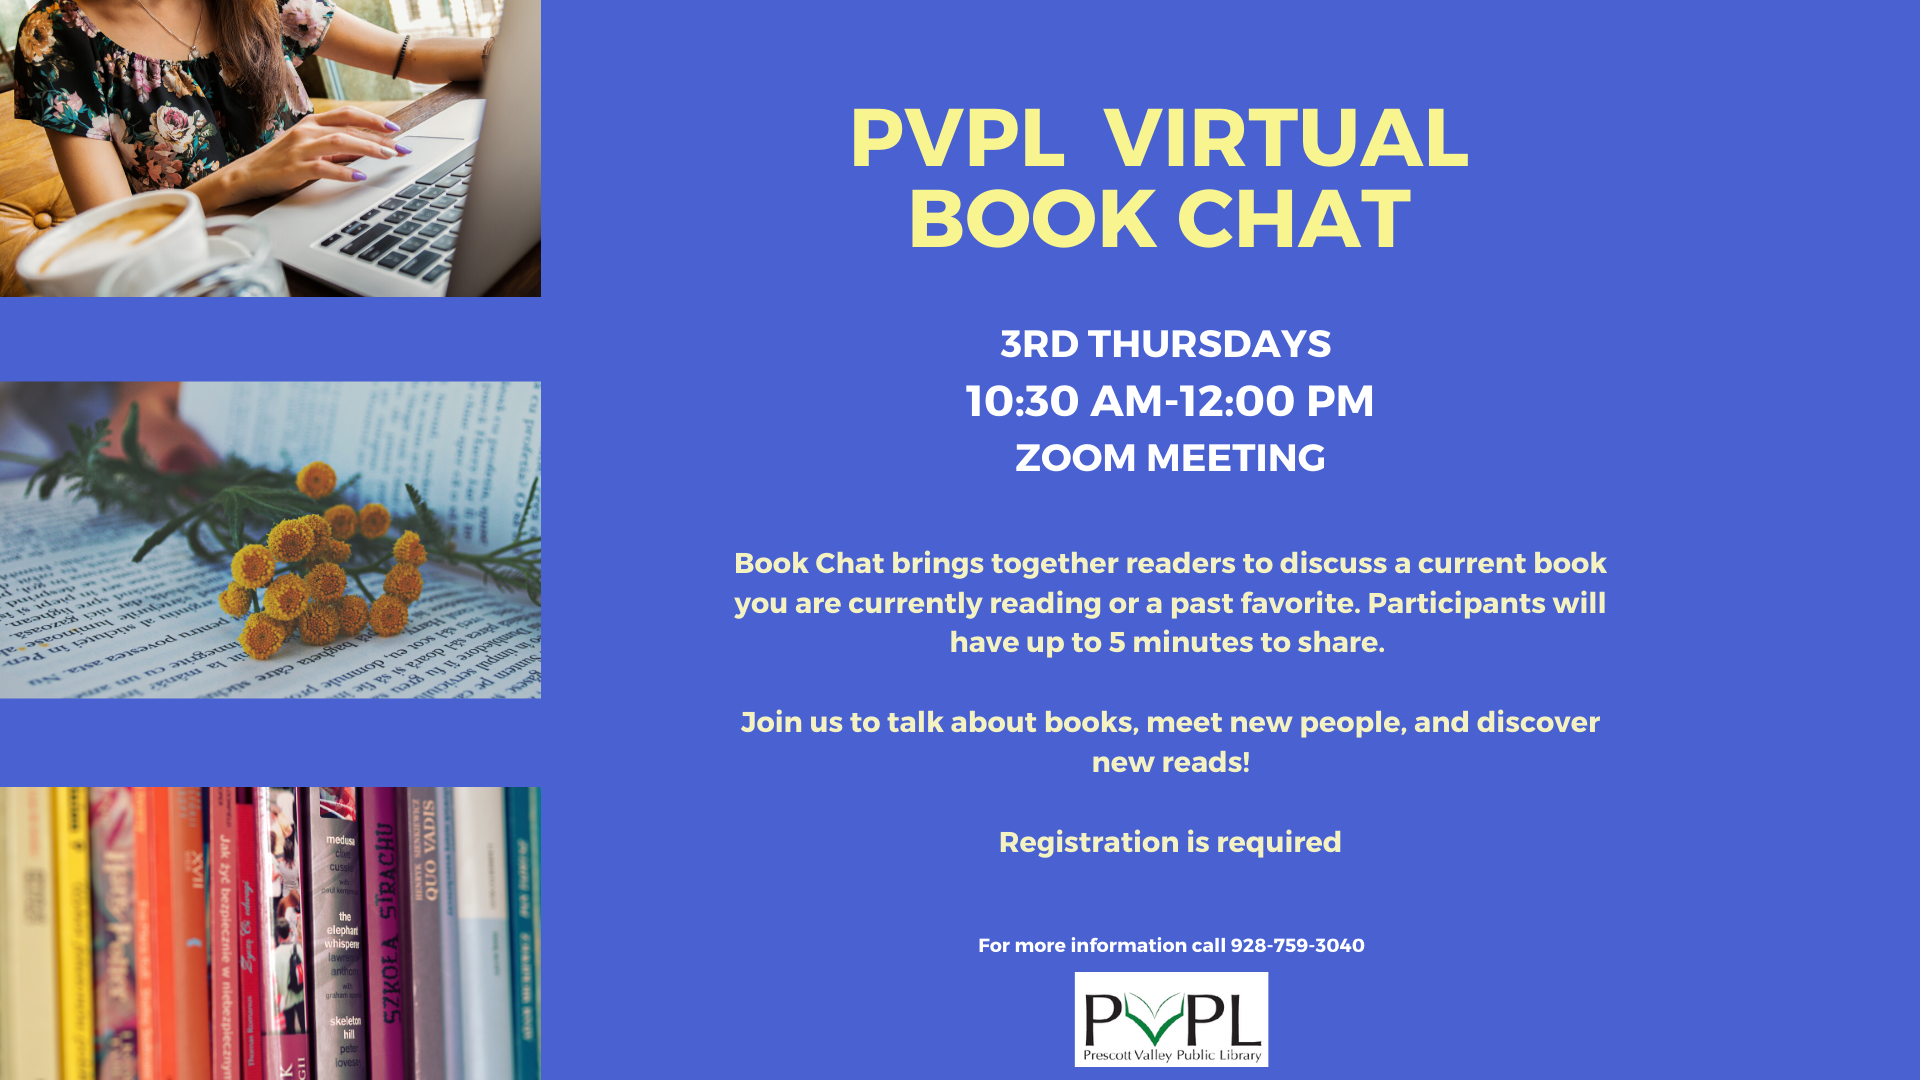 Prescott Valley Public Library Virtual Book Chat – Registration is Required